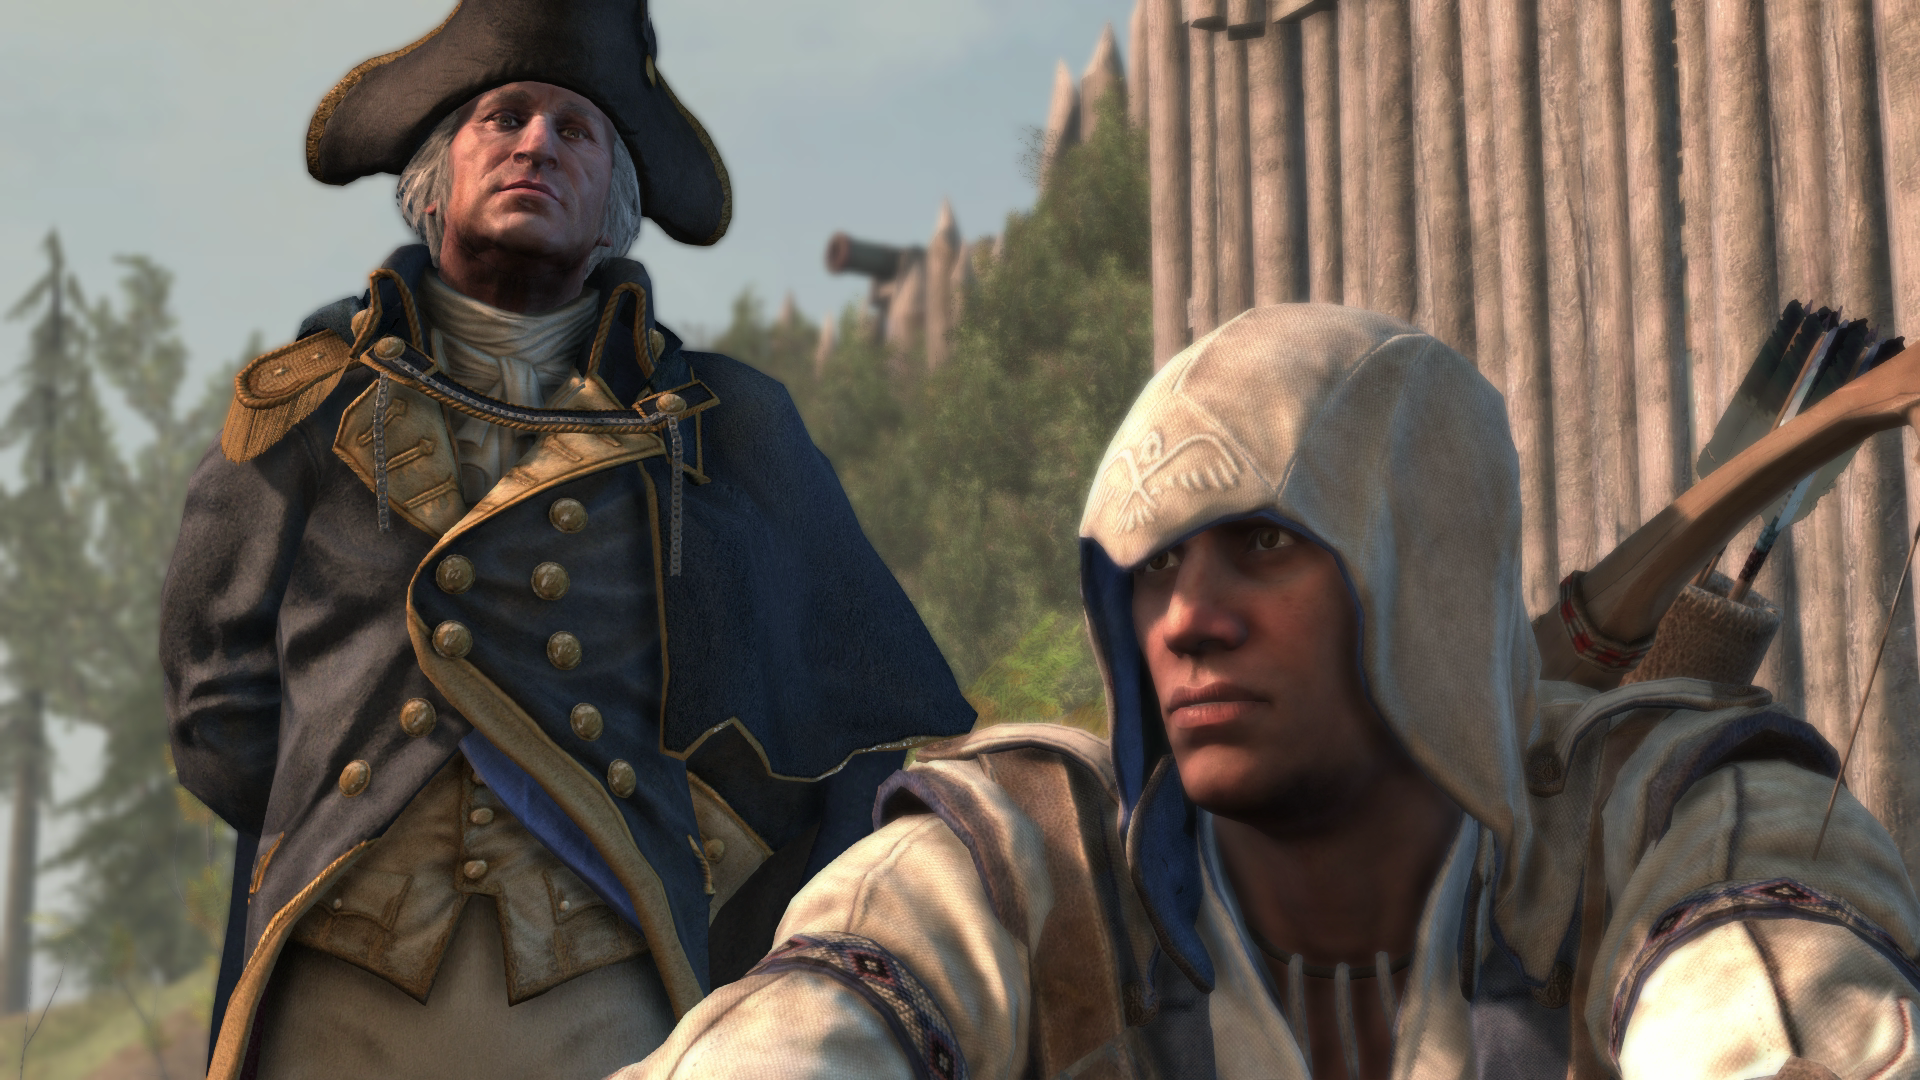 assassin creed 3 sequence 4